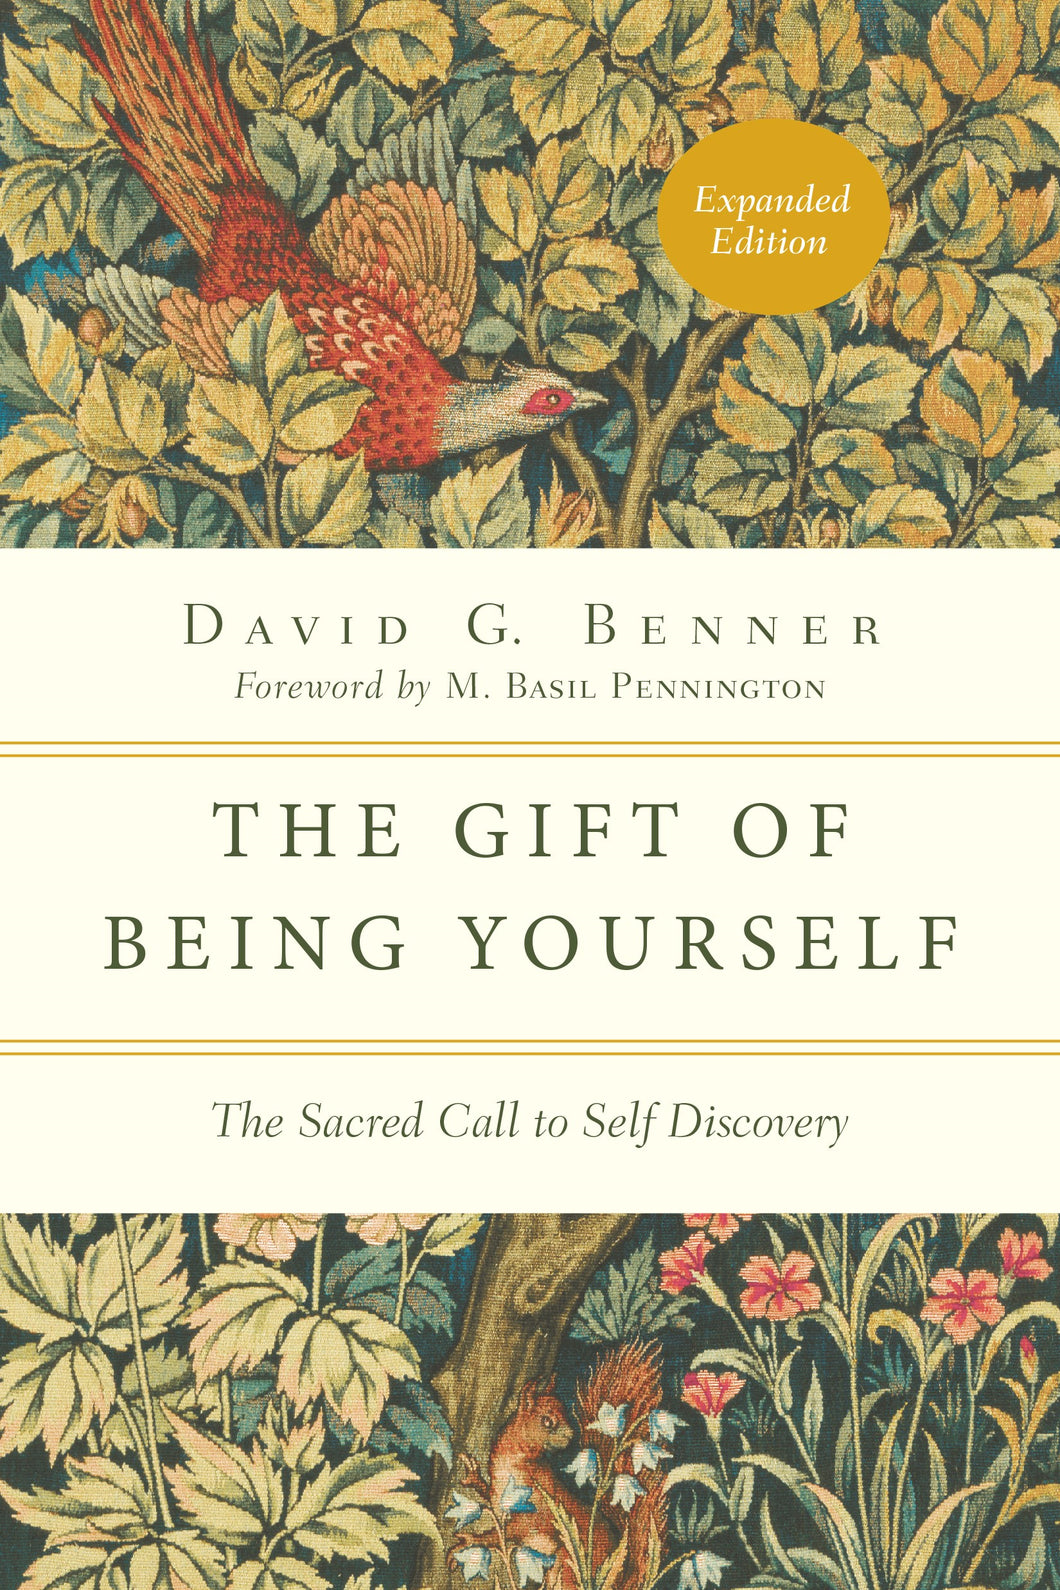 The Gift Of Being Yourself (Expanded Edition)